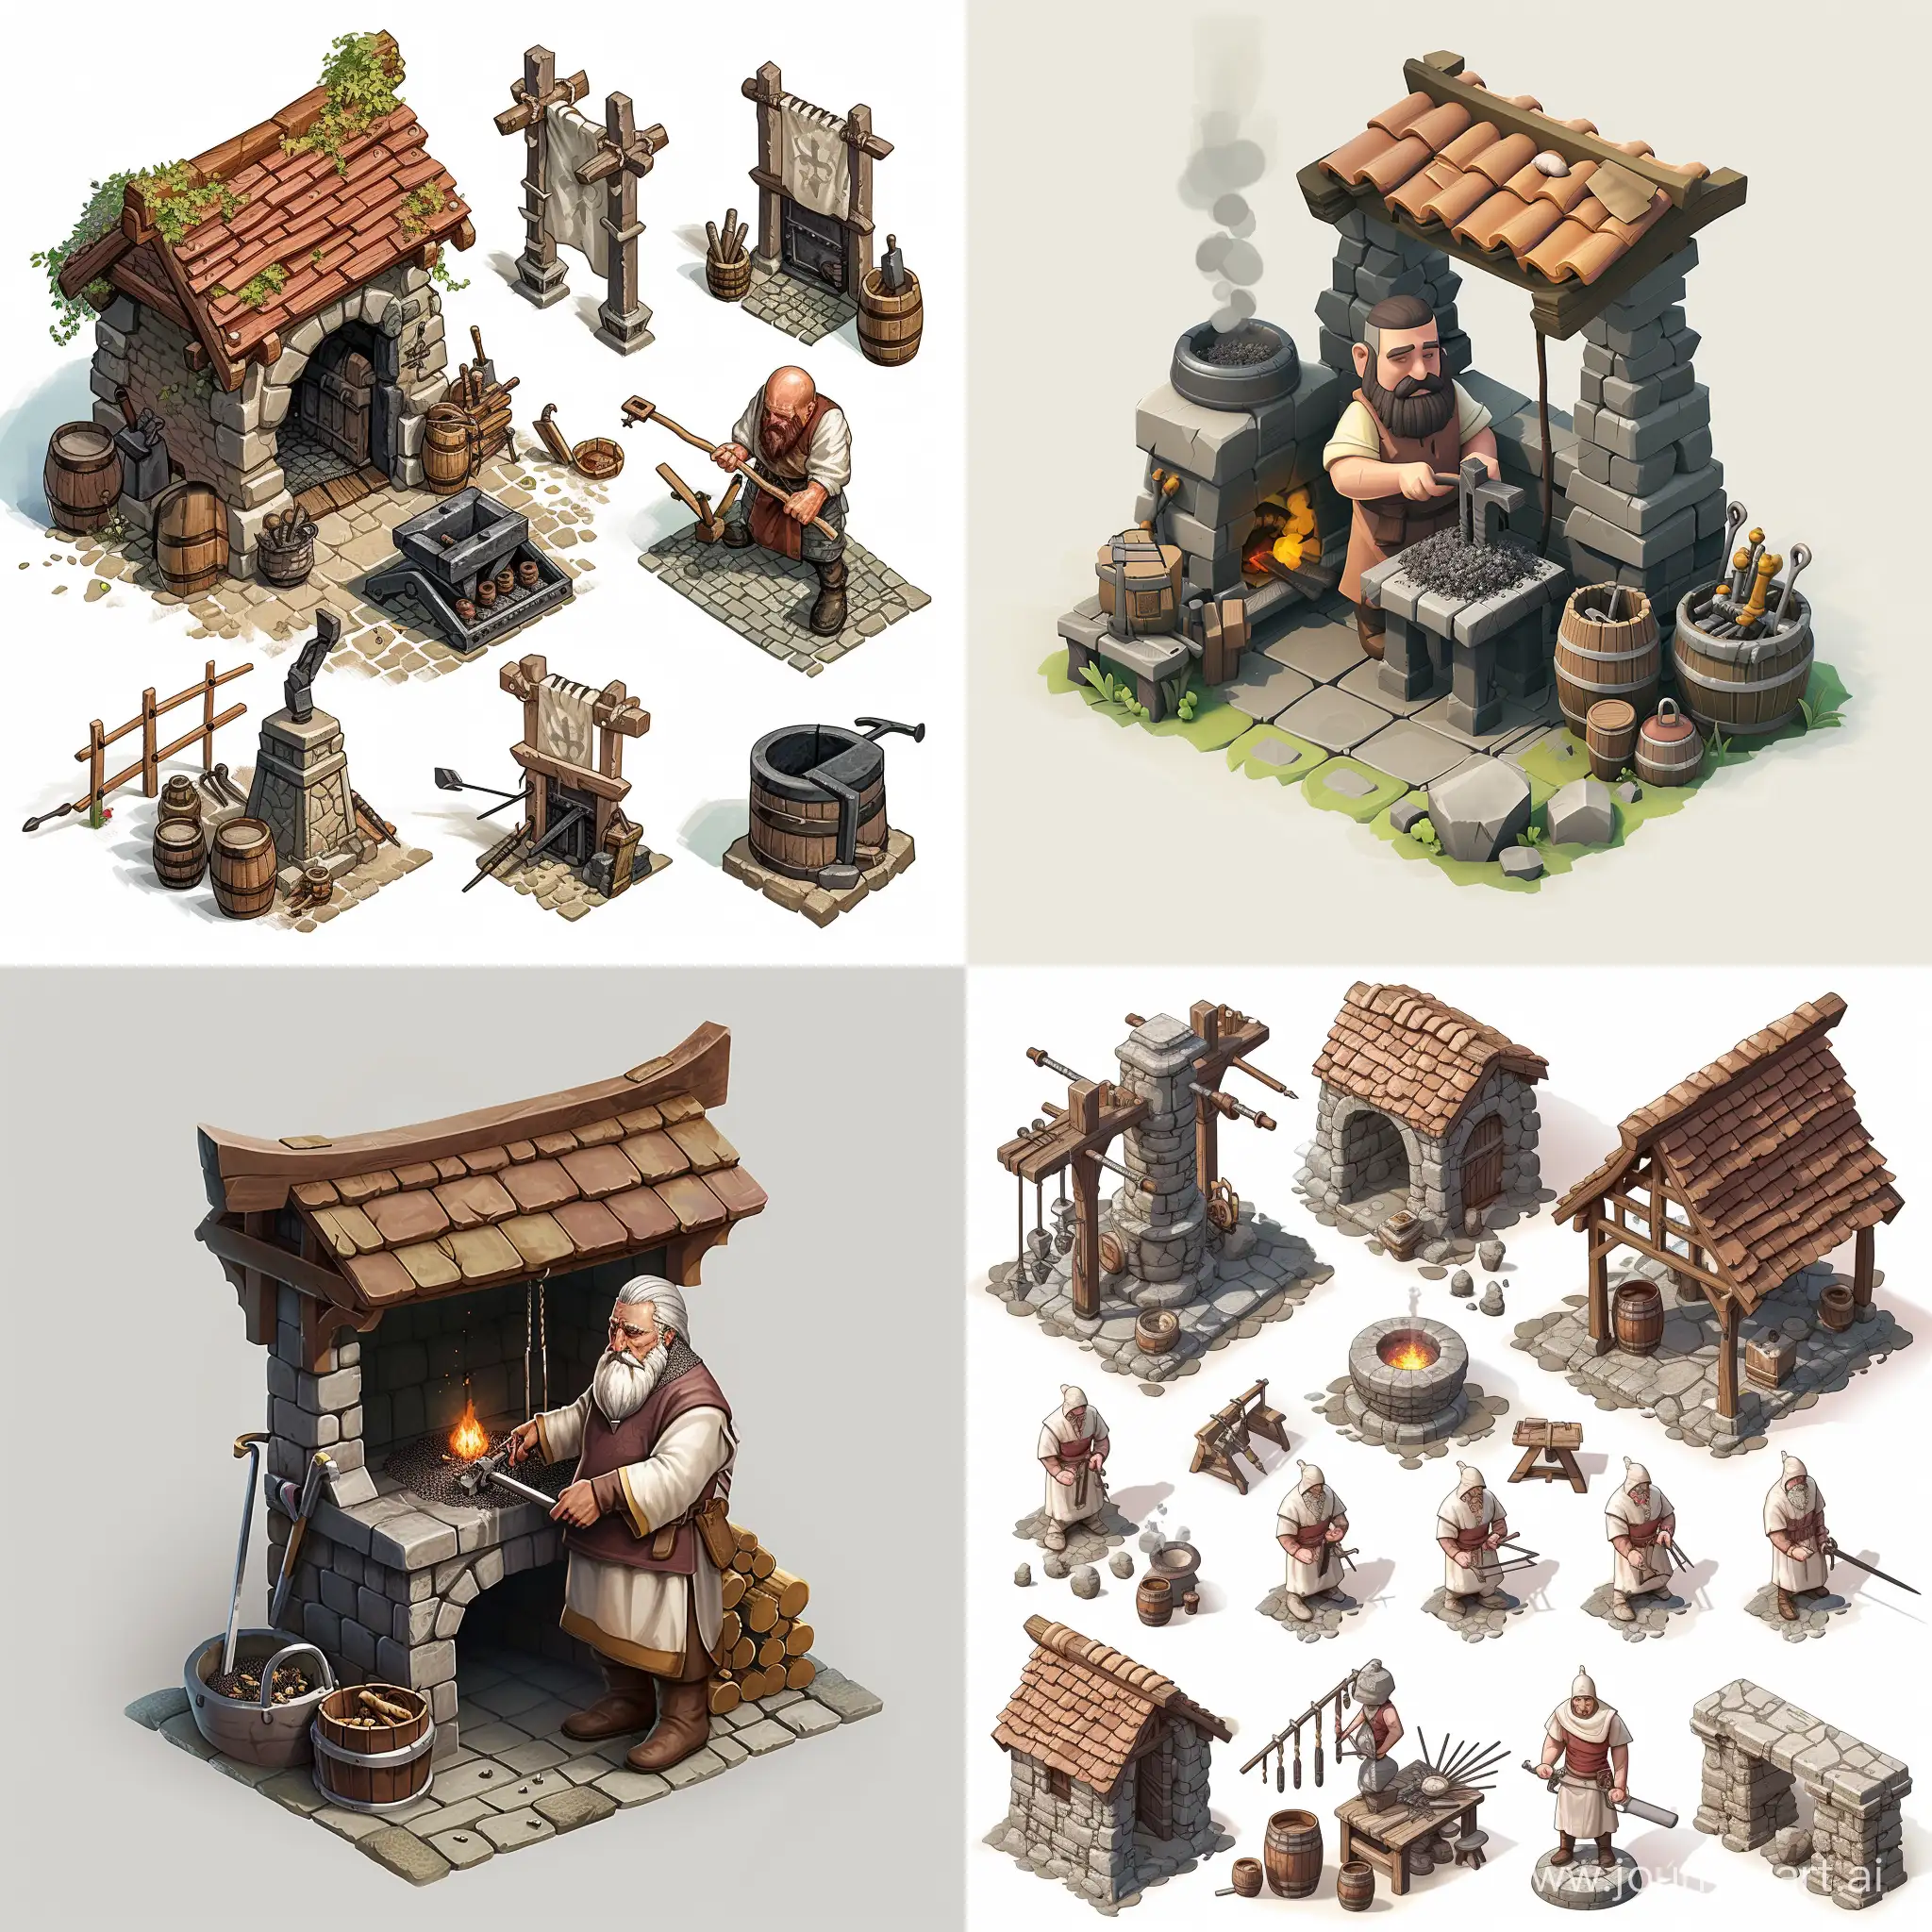 Realistic-Medieval-Blacksmith-Model-for-RTS-Game-Isometric-View